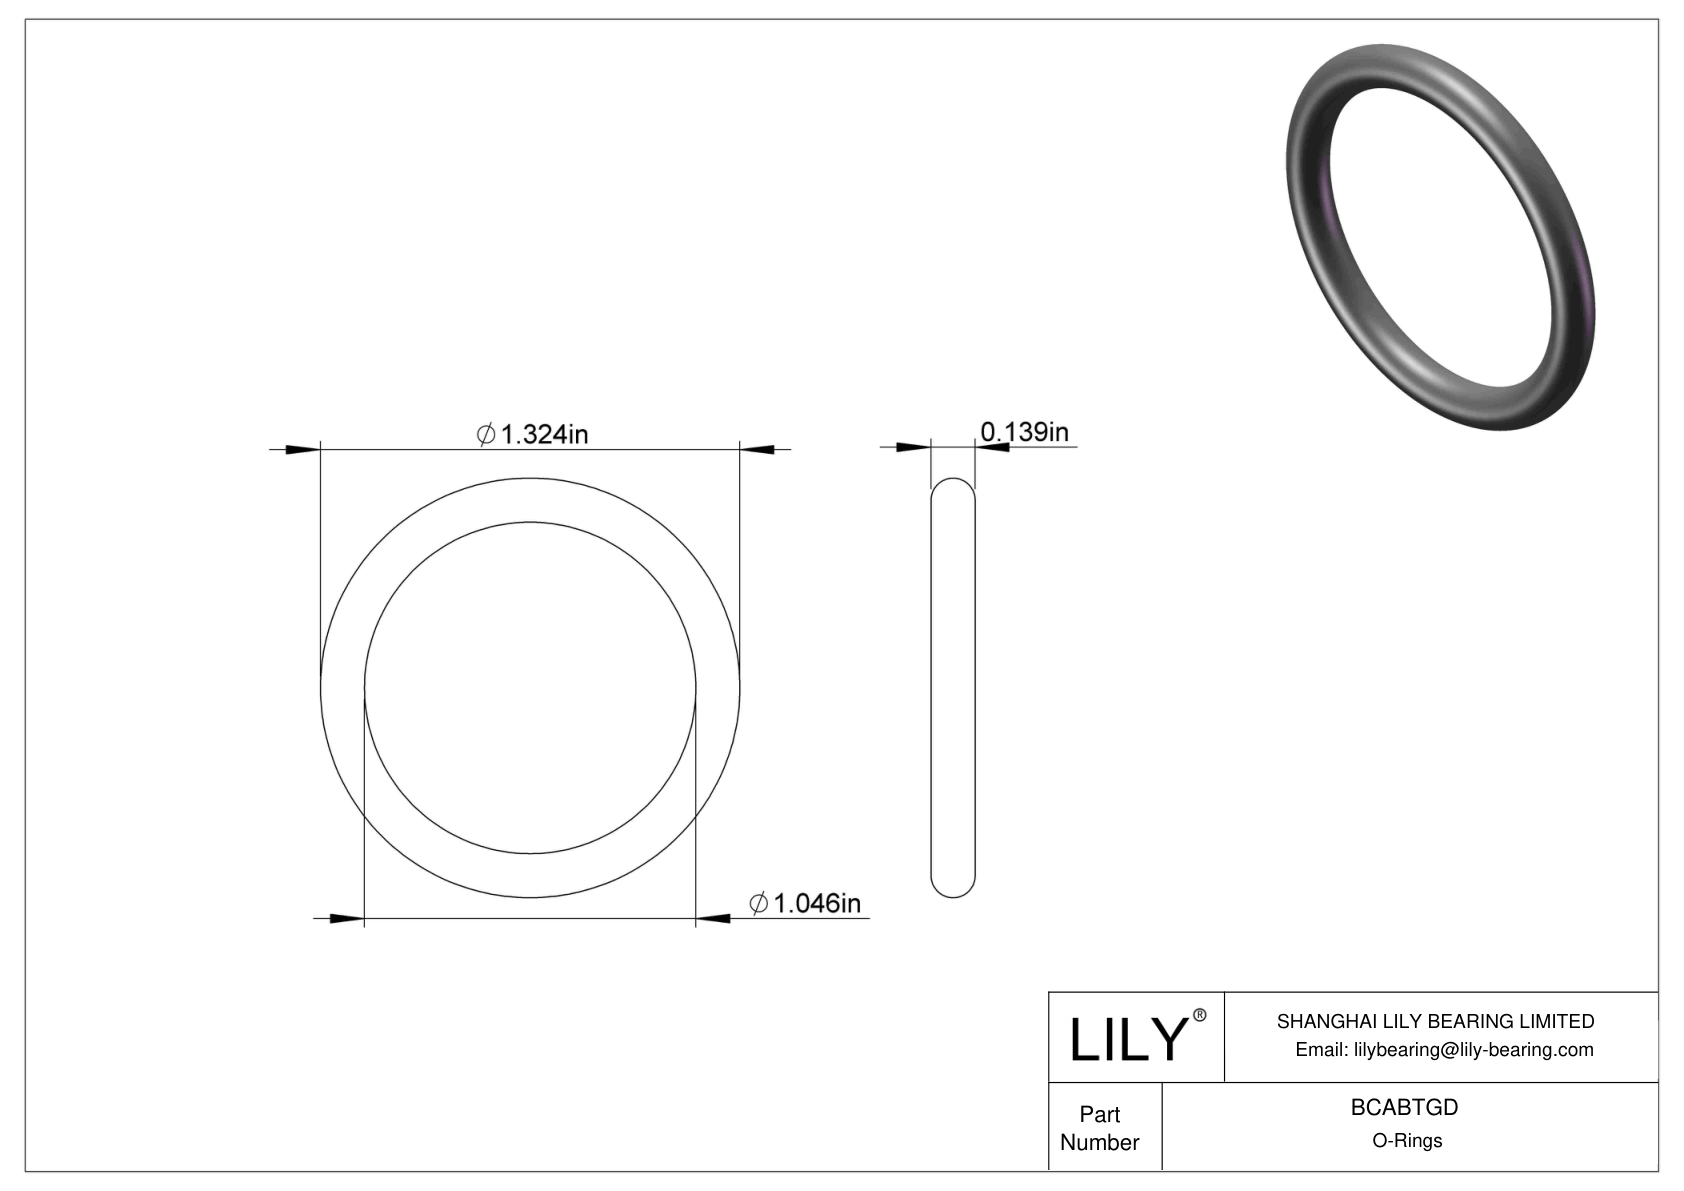 BCABTGD Chemical Resistant O-rings Round cad drawing